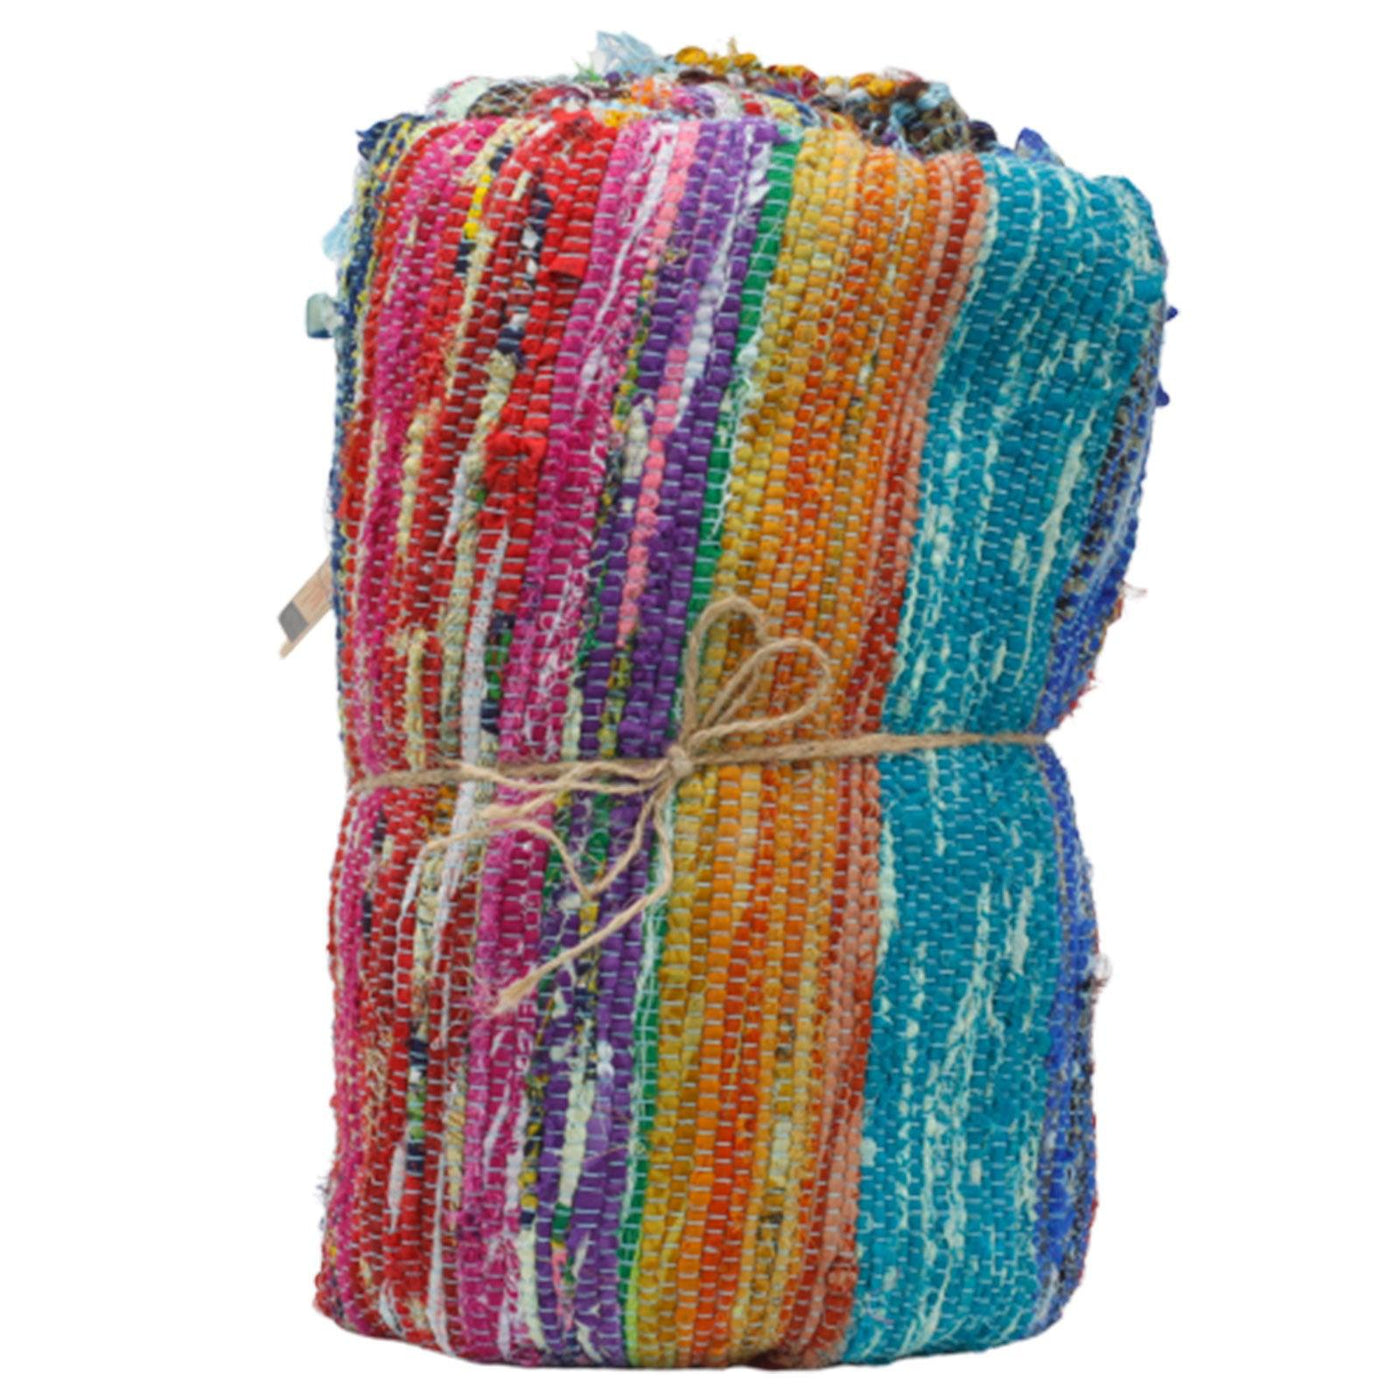 Eco Friendly Multicolours Stripped Indian Rag Rugs Blue Accent 153 x 90cm.